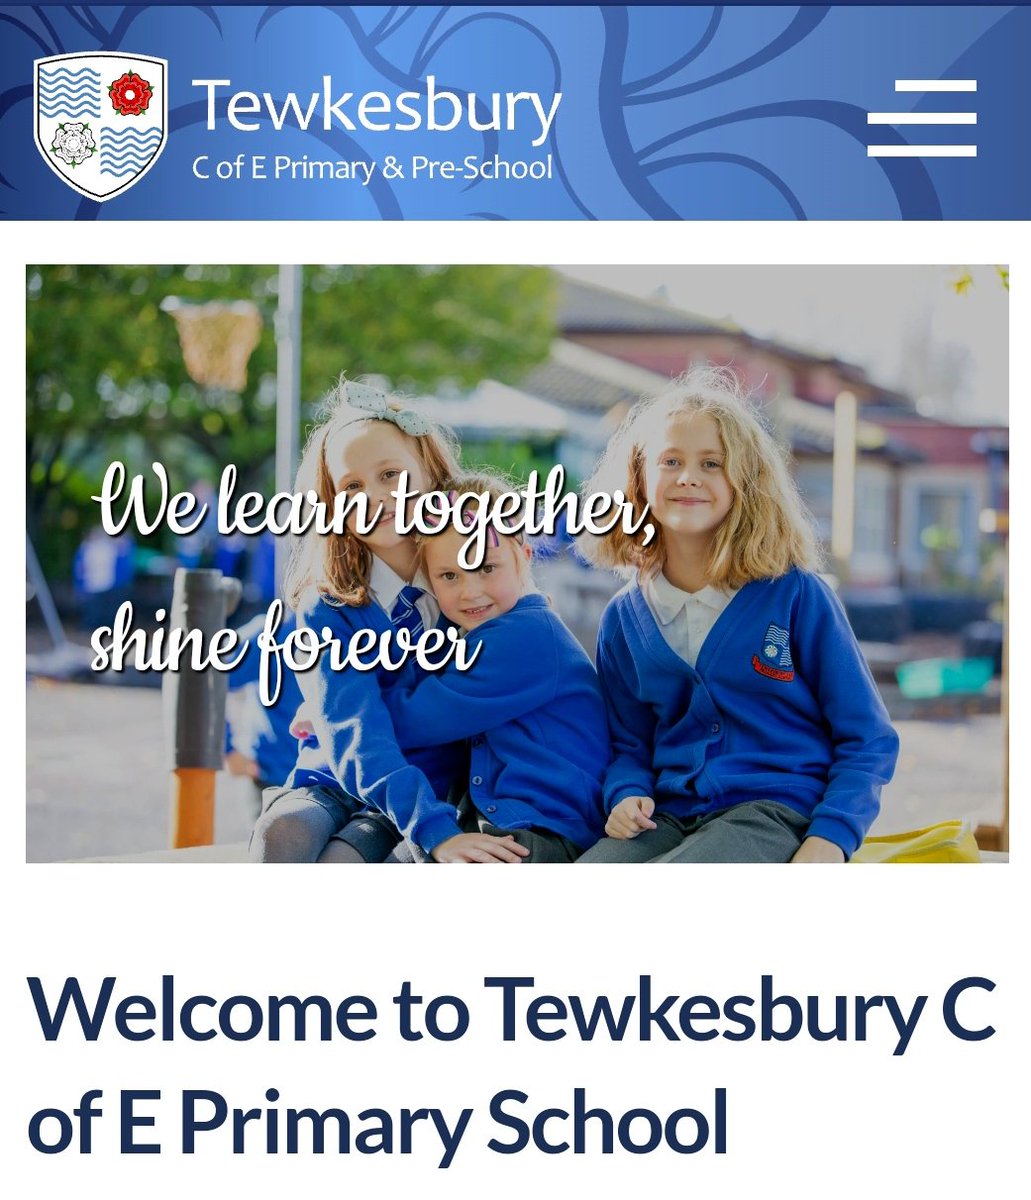 .....and our School's new website is Live! 🎉🥳🎊😁

#TewkesburyPrimary #TewkPri #tewkesburyprimary #tewkesburycofeprimary #TewkesburyCofEPrimary #tewkesbury #tewkesburycofeprimaryschool #instagood #learntogethershineforever